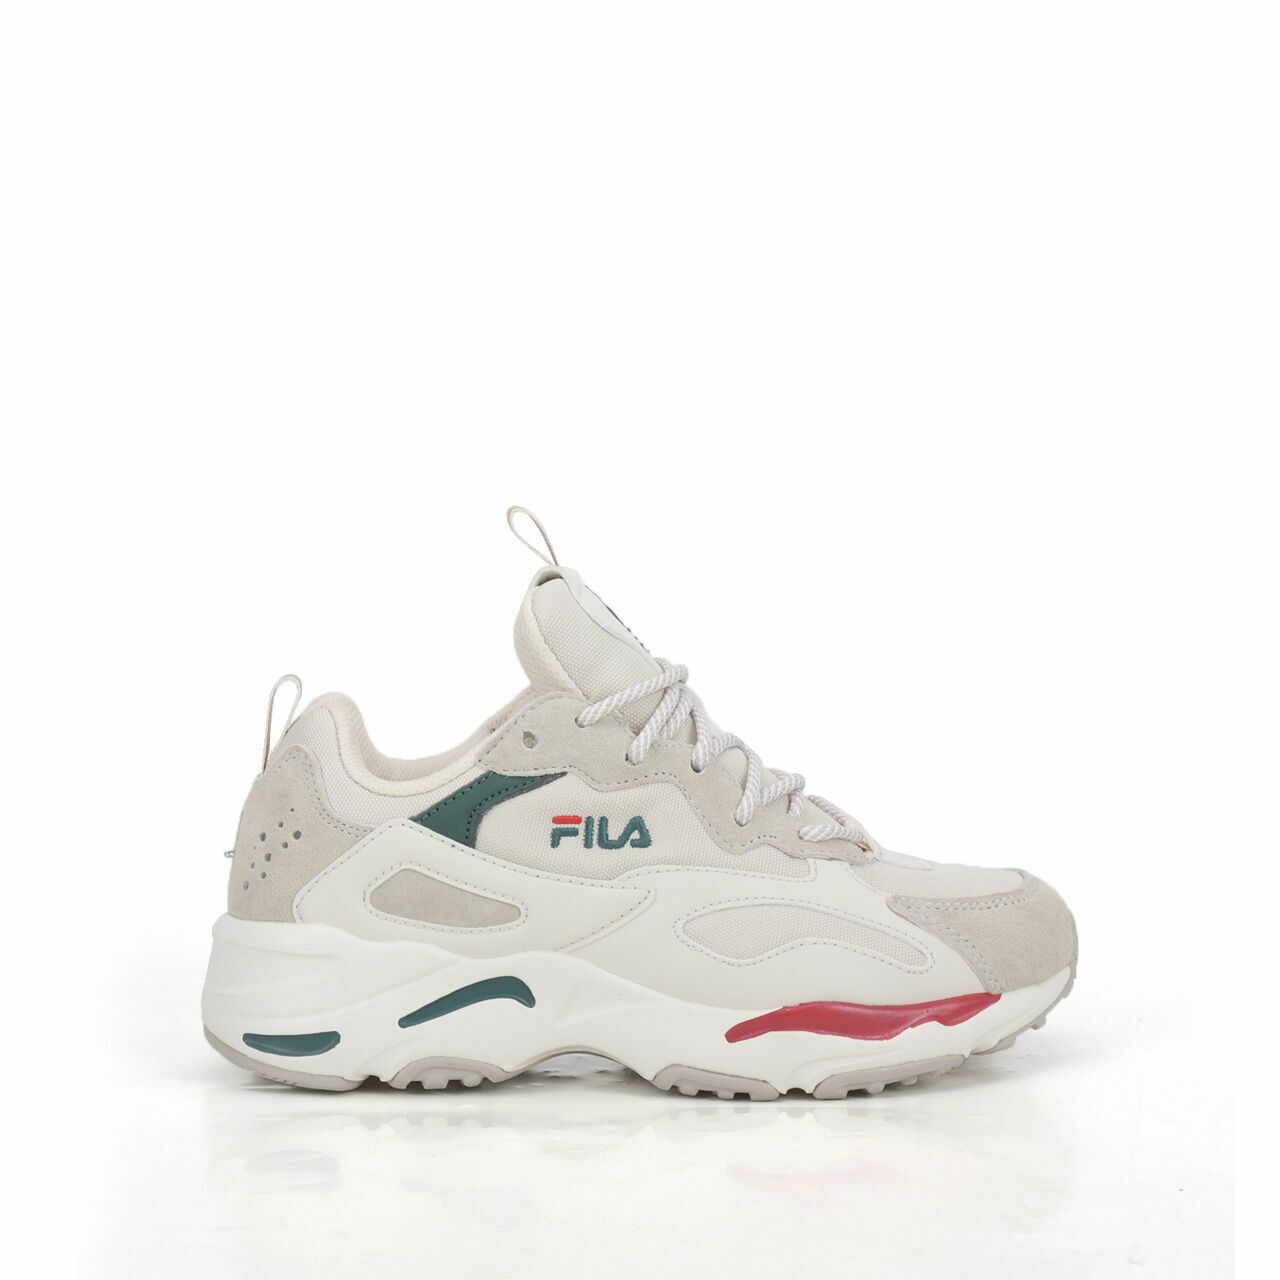 FILA Ray Tracer White Shoes